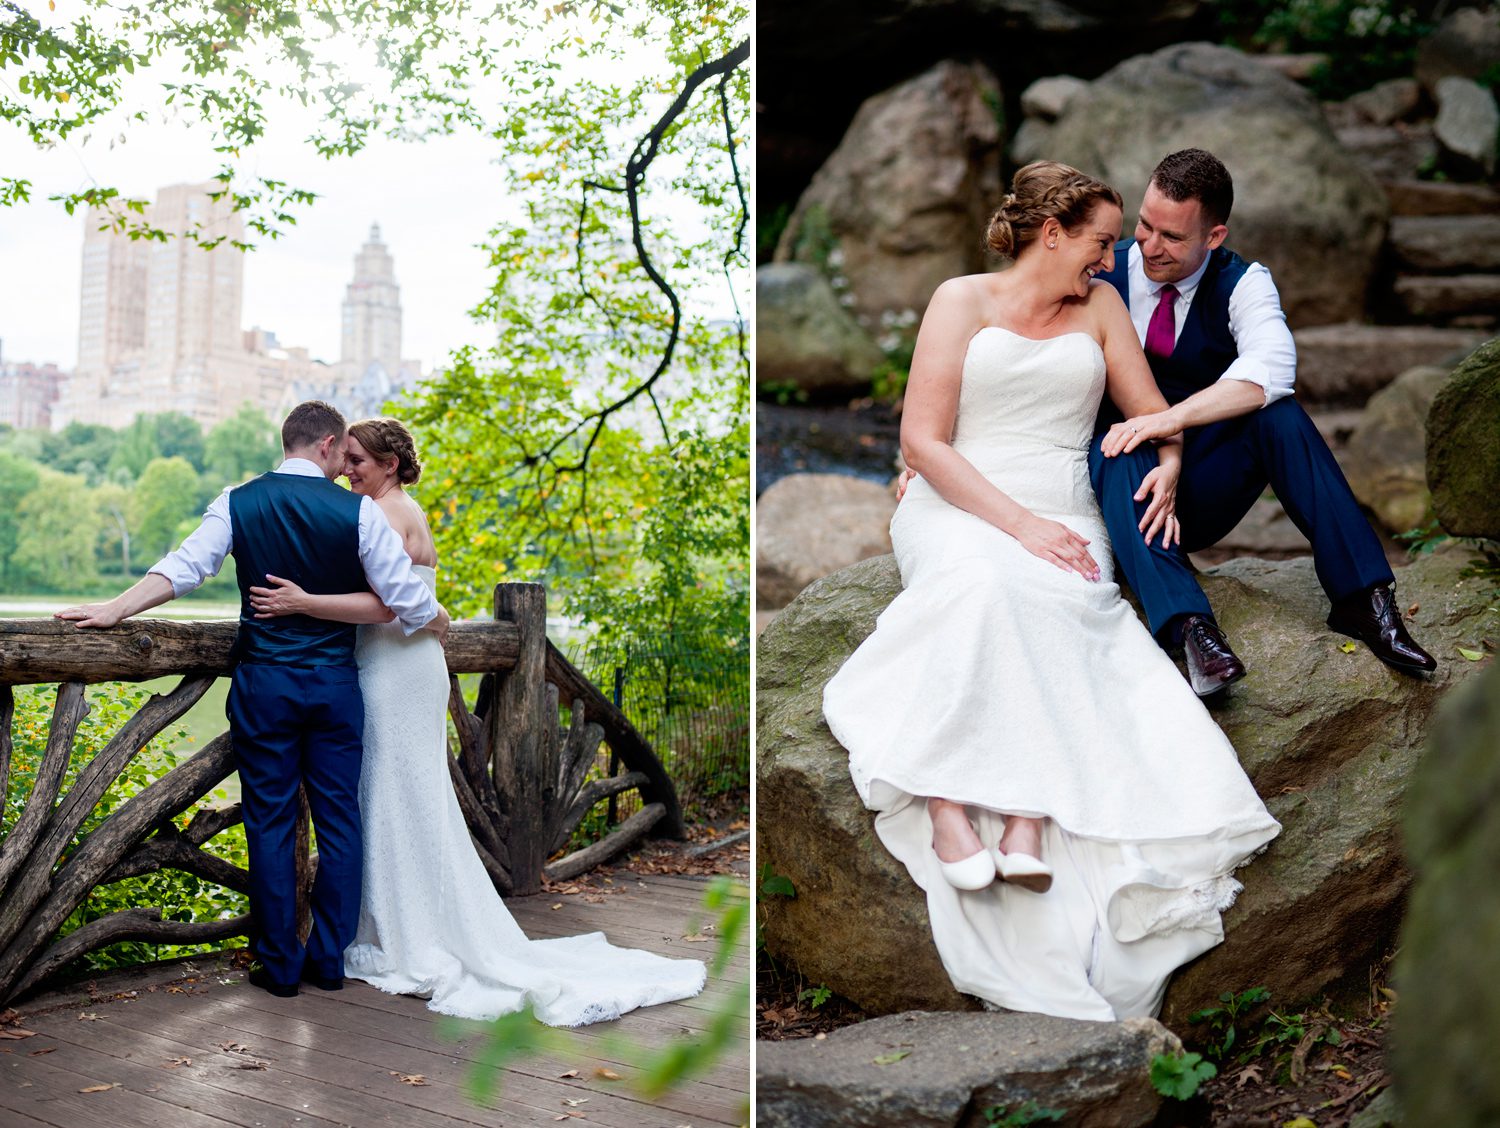 Where to Get Married in Central Park